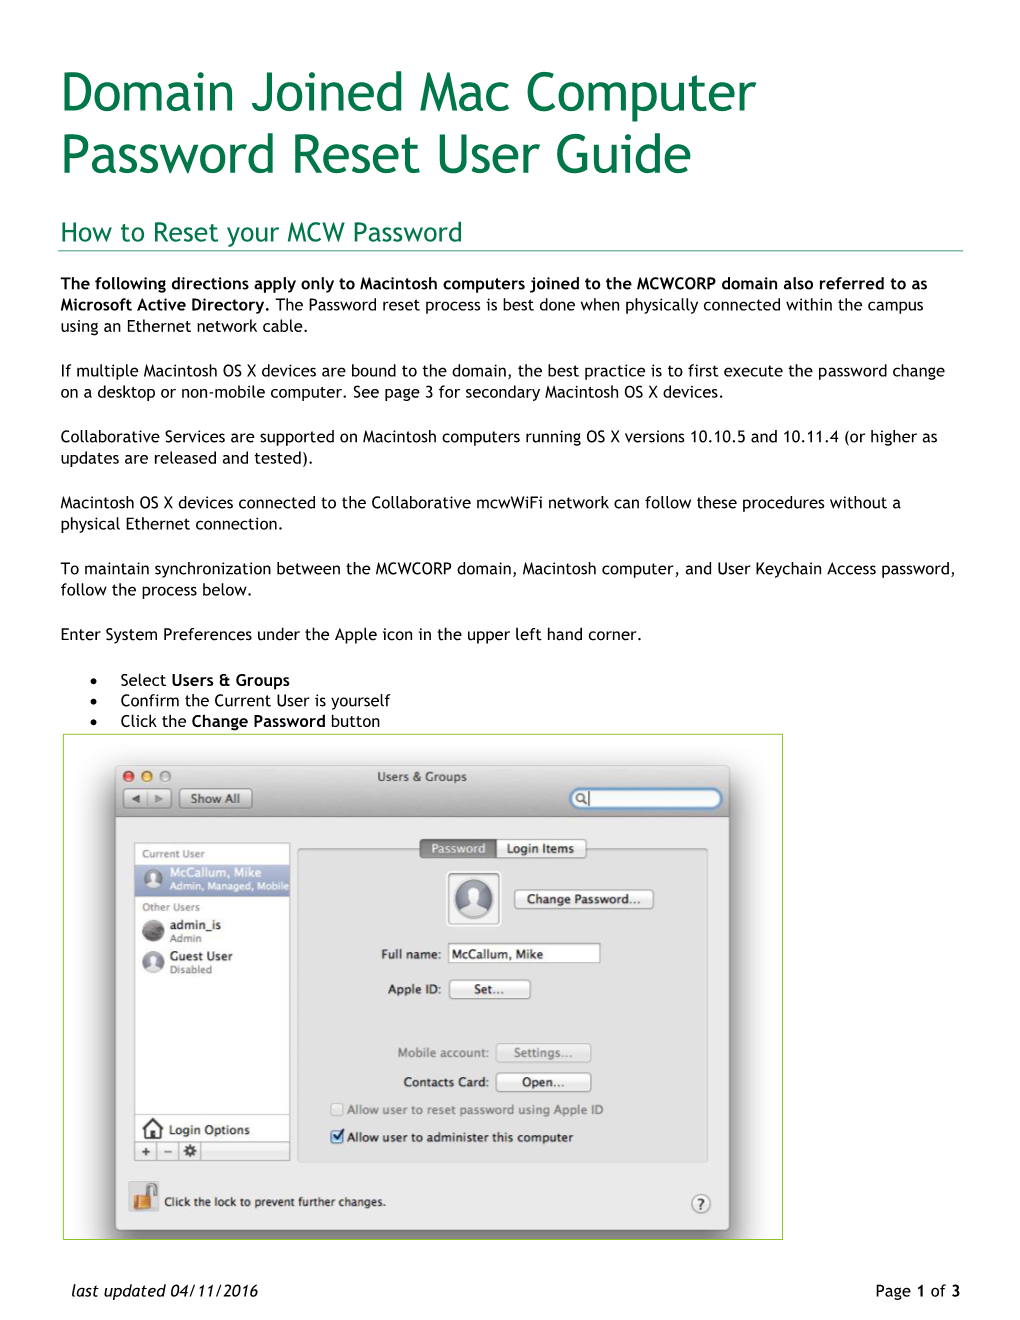 Domain Joined Mac Computer Password Reset User Guide